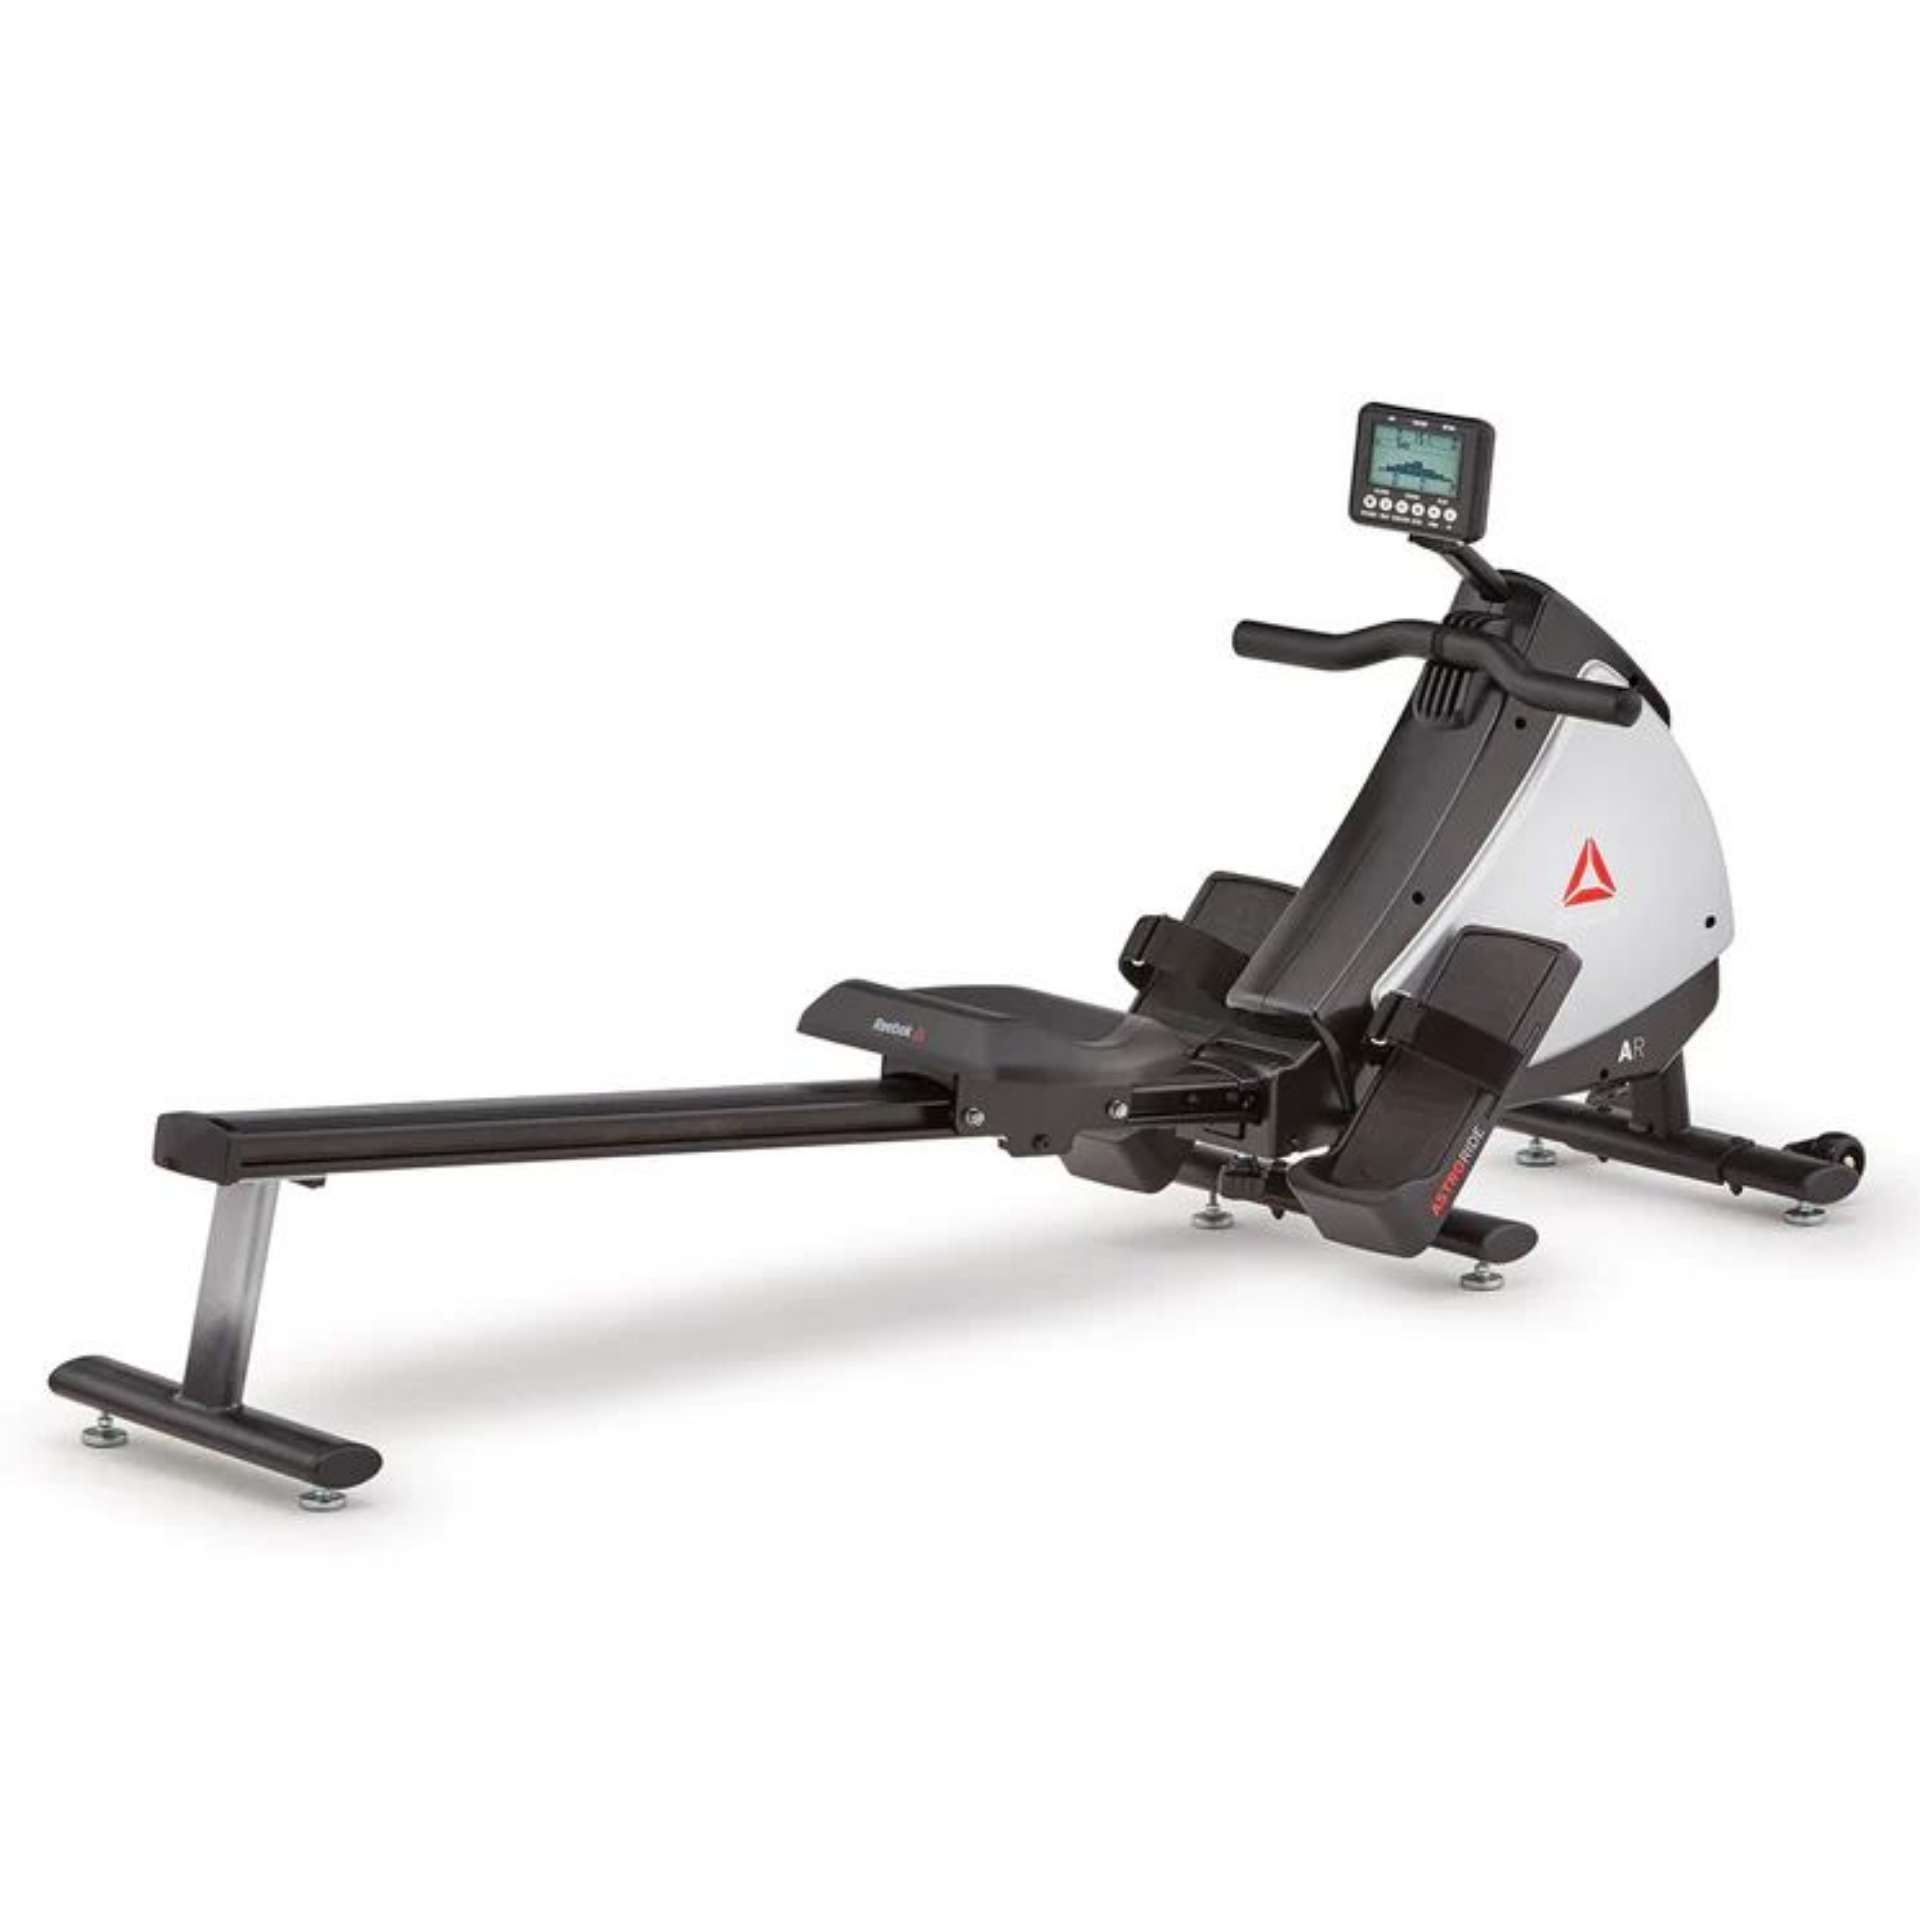 BRAND NEW REEBOK AR Rower. RRP £514.99 EACH R18-4. Designed for you to create more effective and - Image 3 of 4